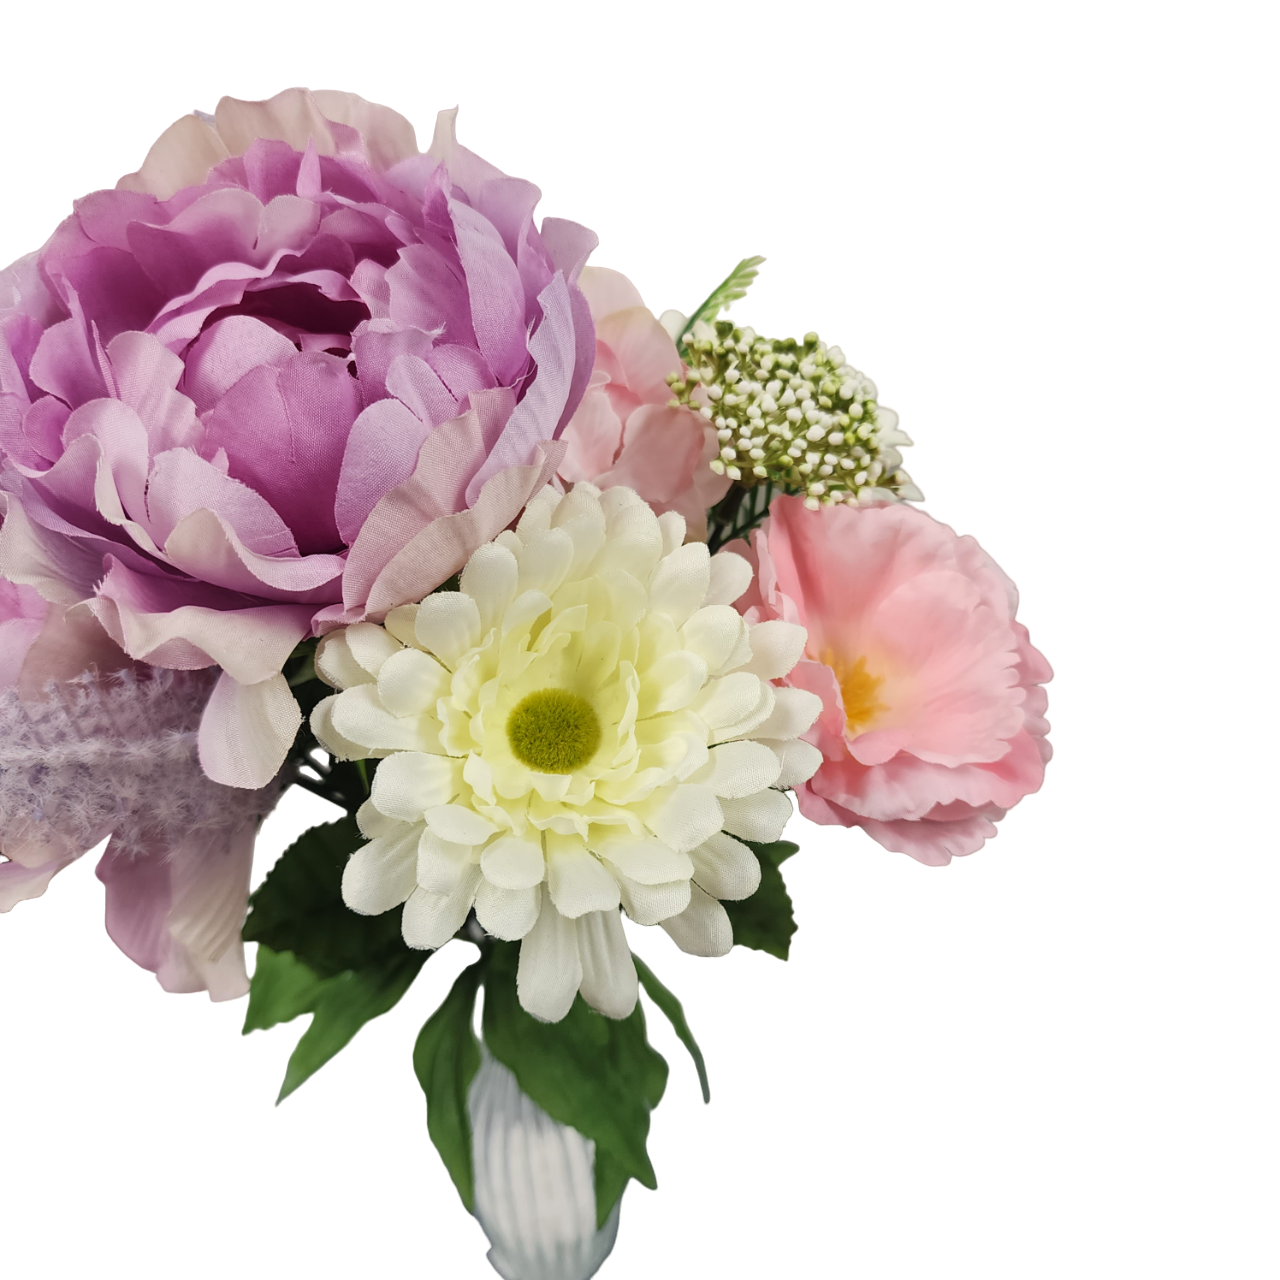 Mainstays Artificial Pink Mixed Peony & Hydrangea 17 in Tall Spring Indoor Bouquet - image 4 of 8